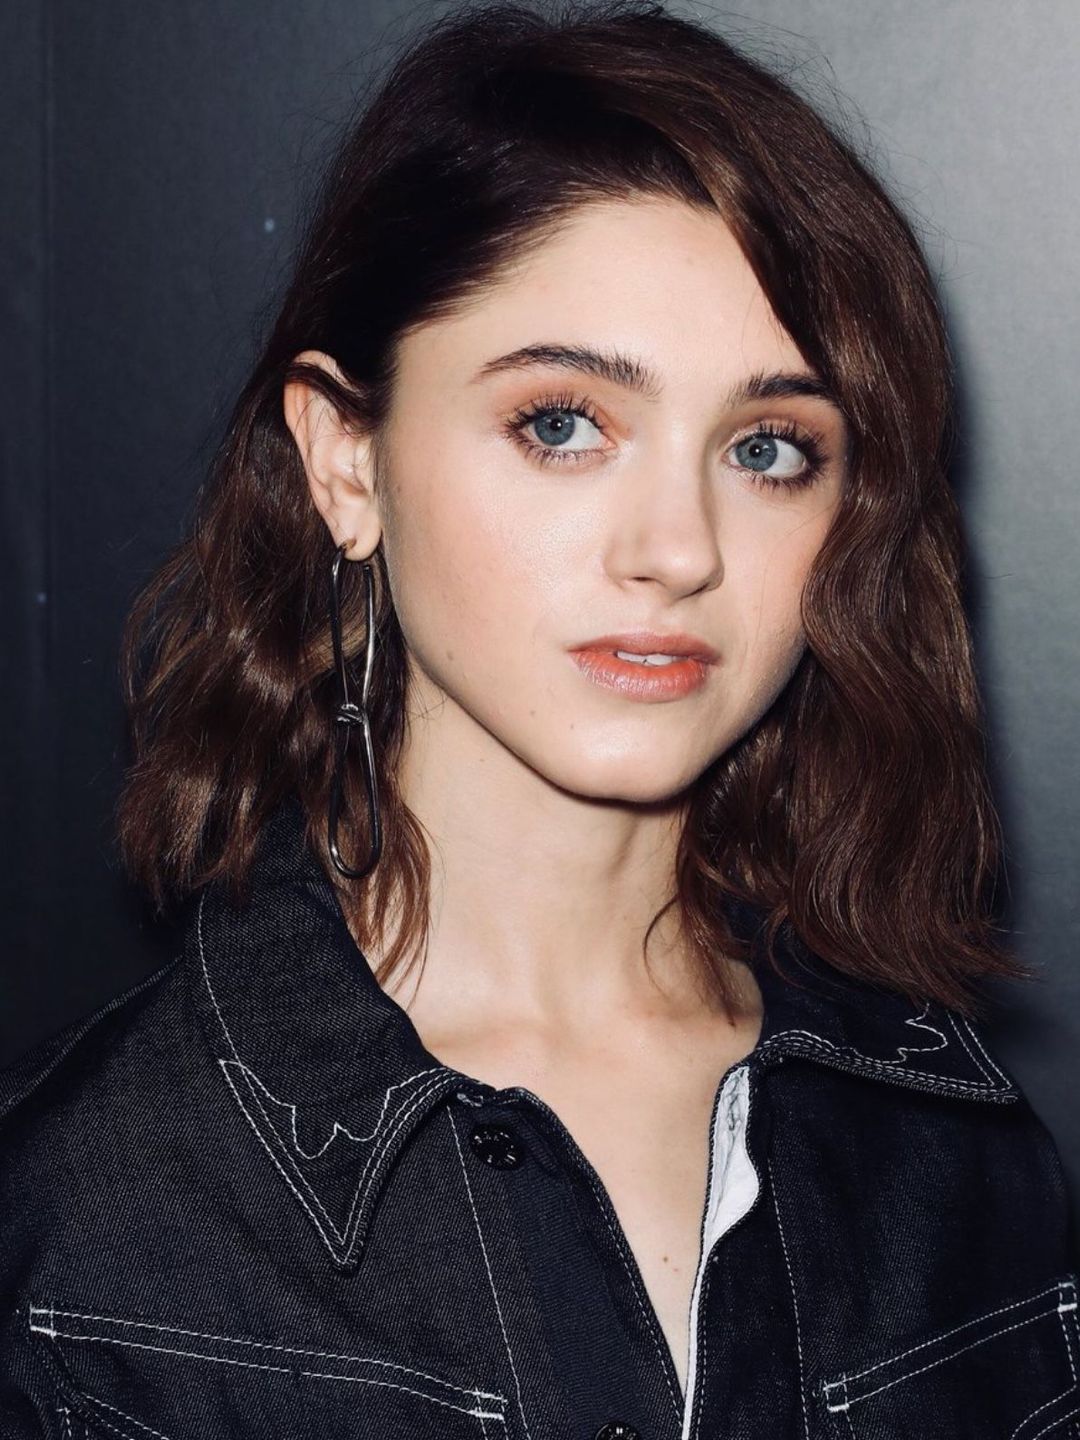 Natalia Dyer who is her mother